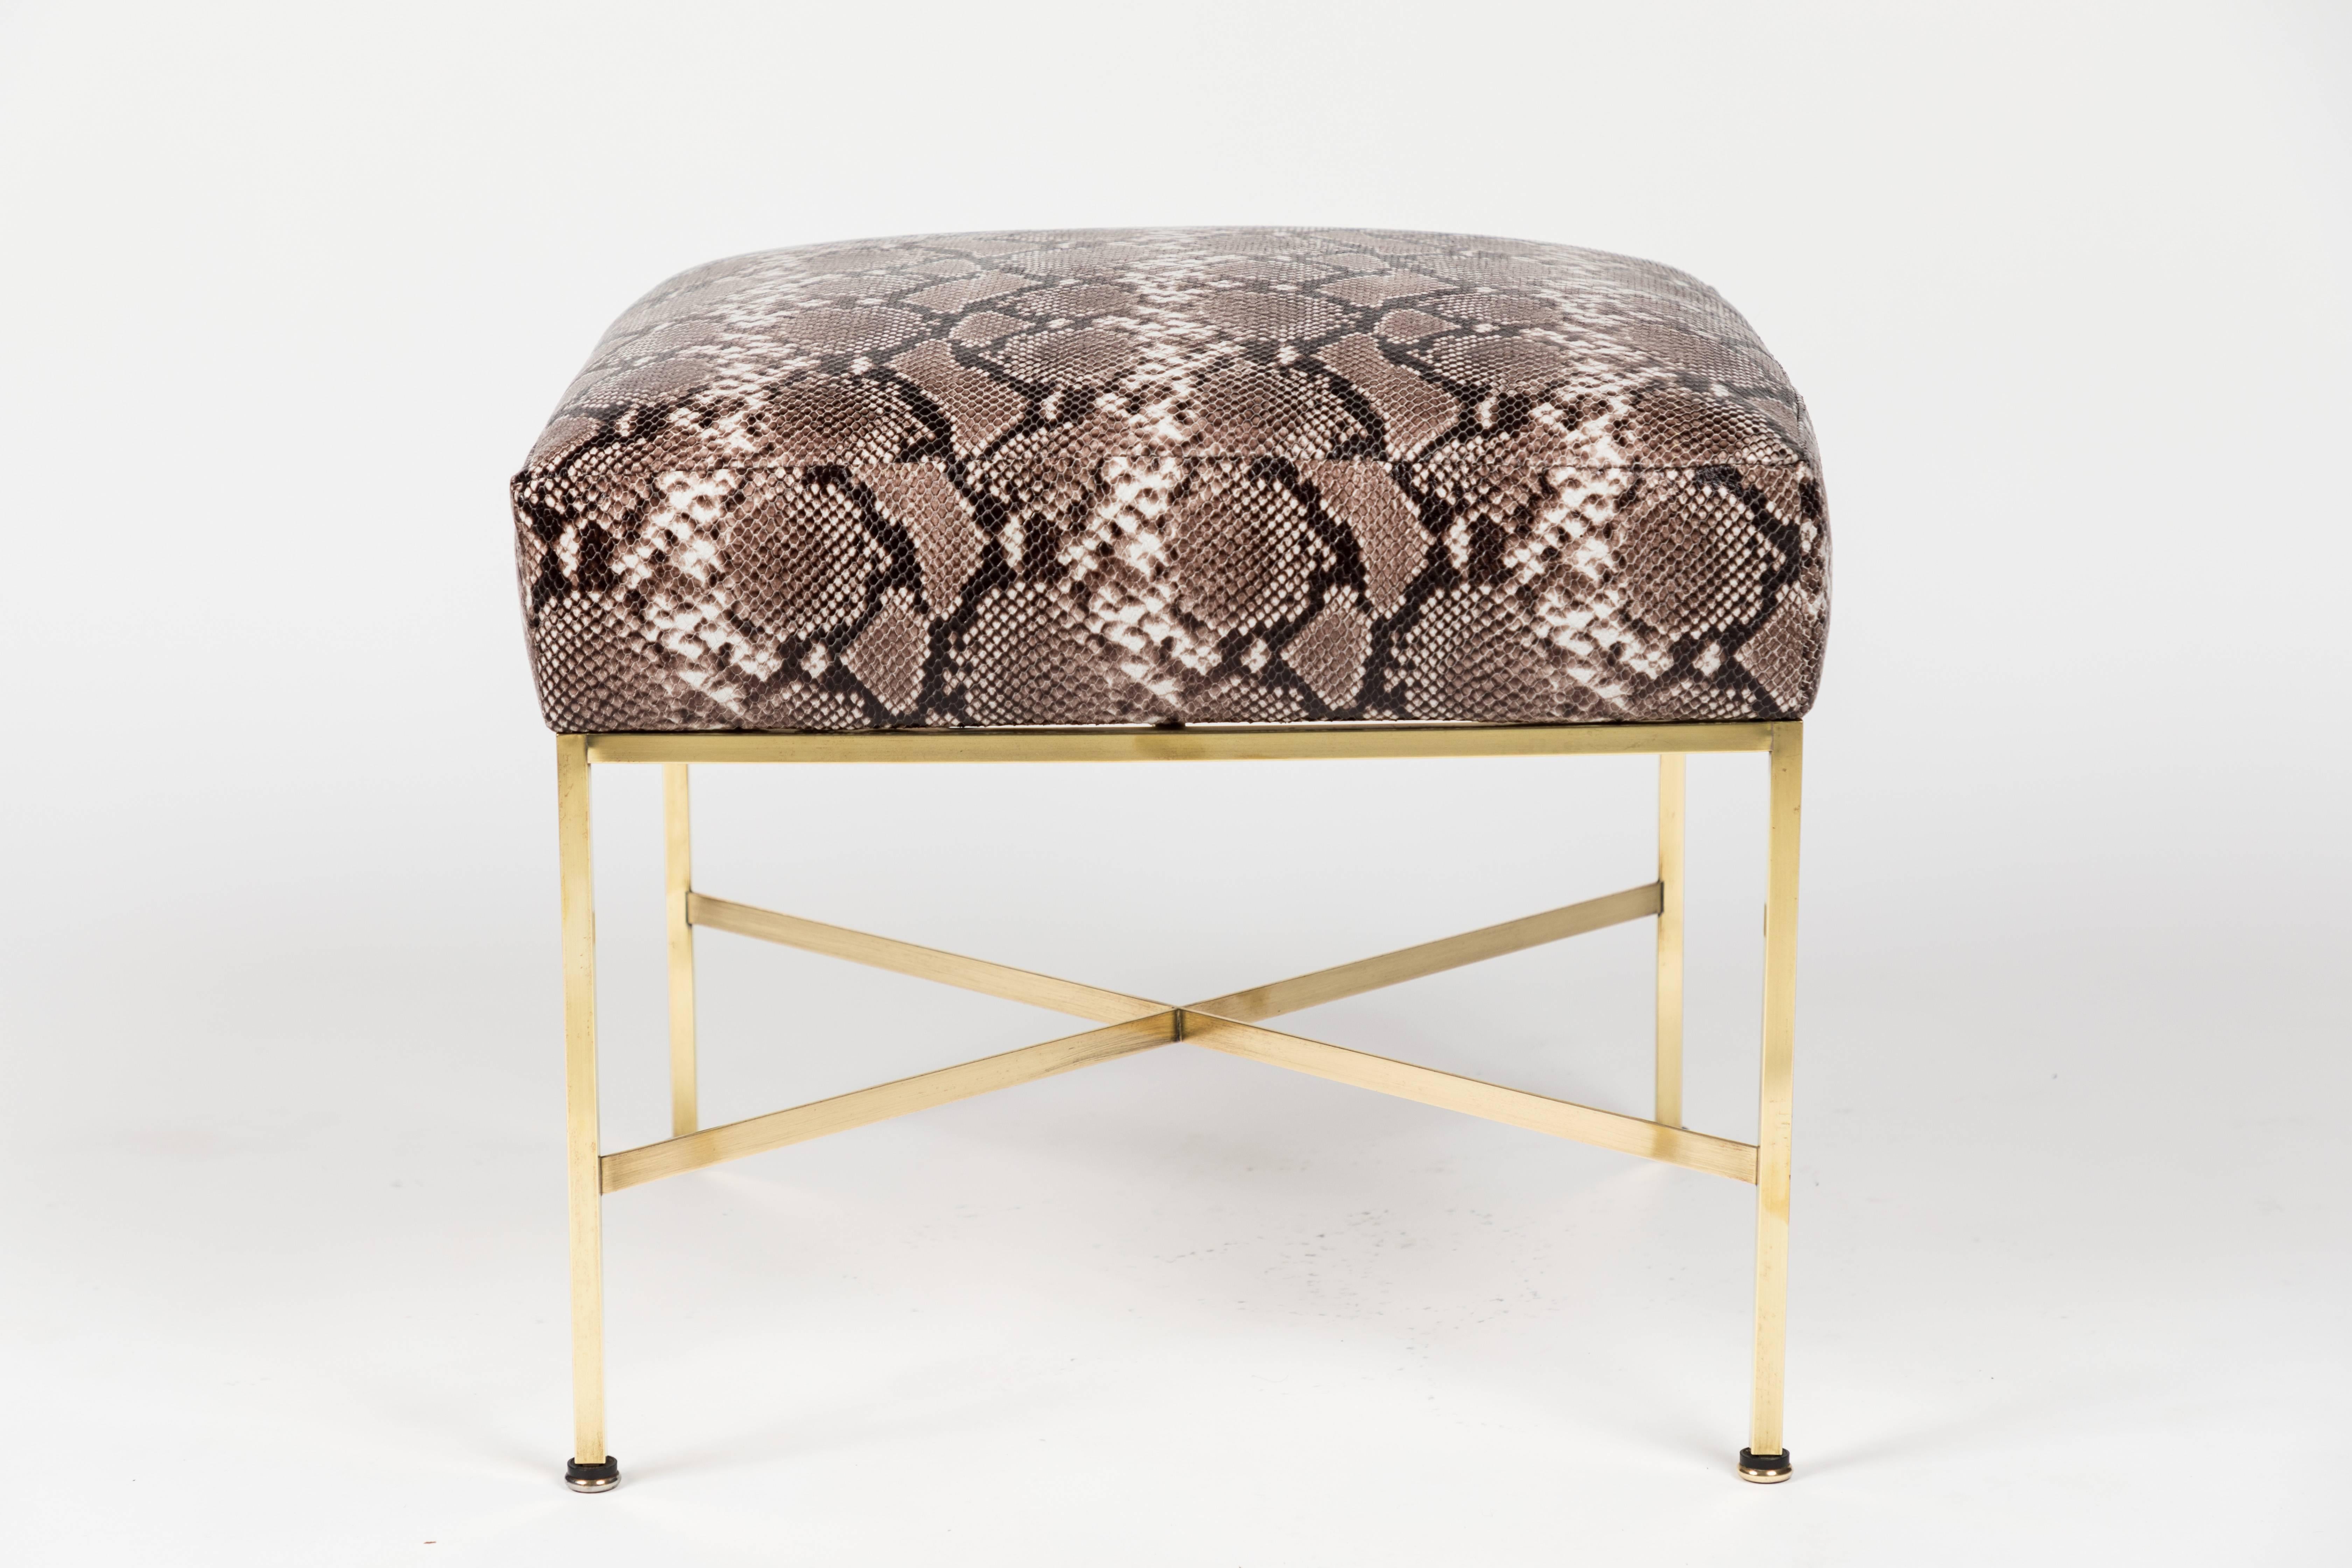 Pair of Brass and Python-Printed Leather Stools by Paul McCobb 2